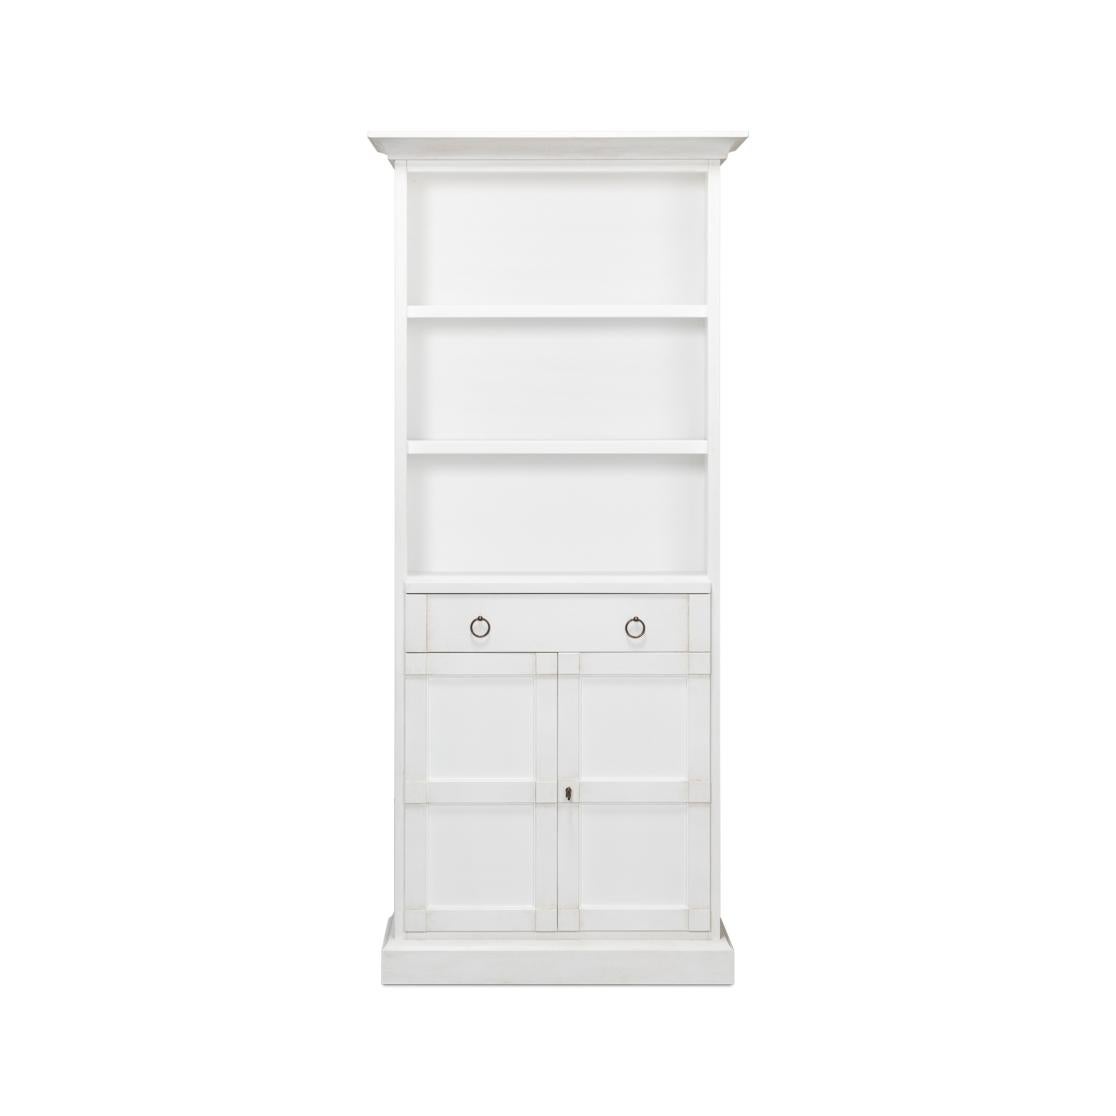 This stately piece stands tall in Cortina white, offering three open shelves that are perfect for displaying your favorite books, photos, or collectibles. Below, the twin drawers with chic ring pulls provide a safe haven for smaller items, while the